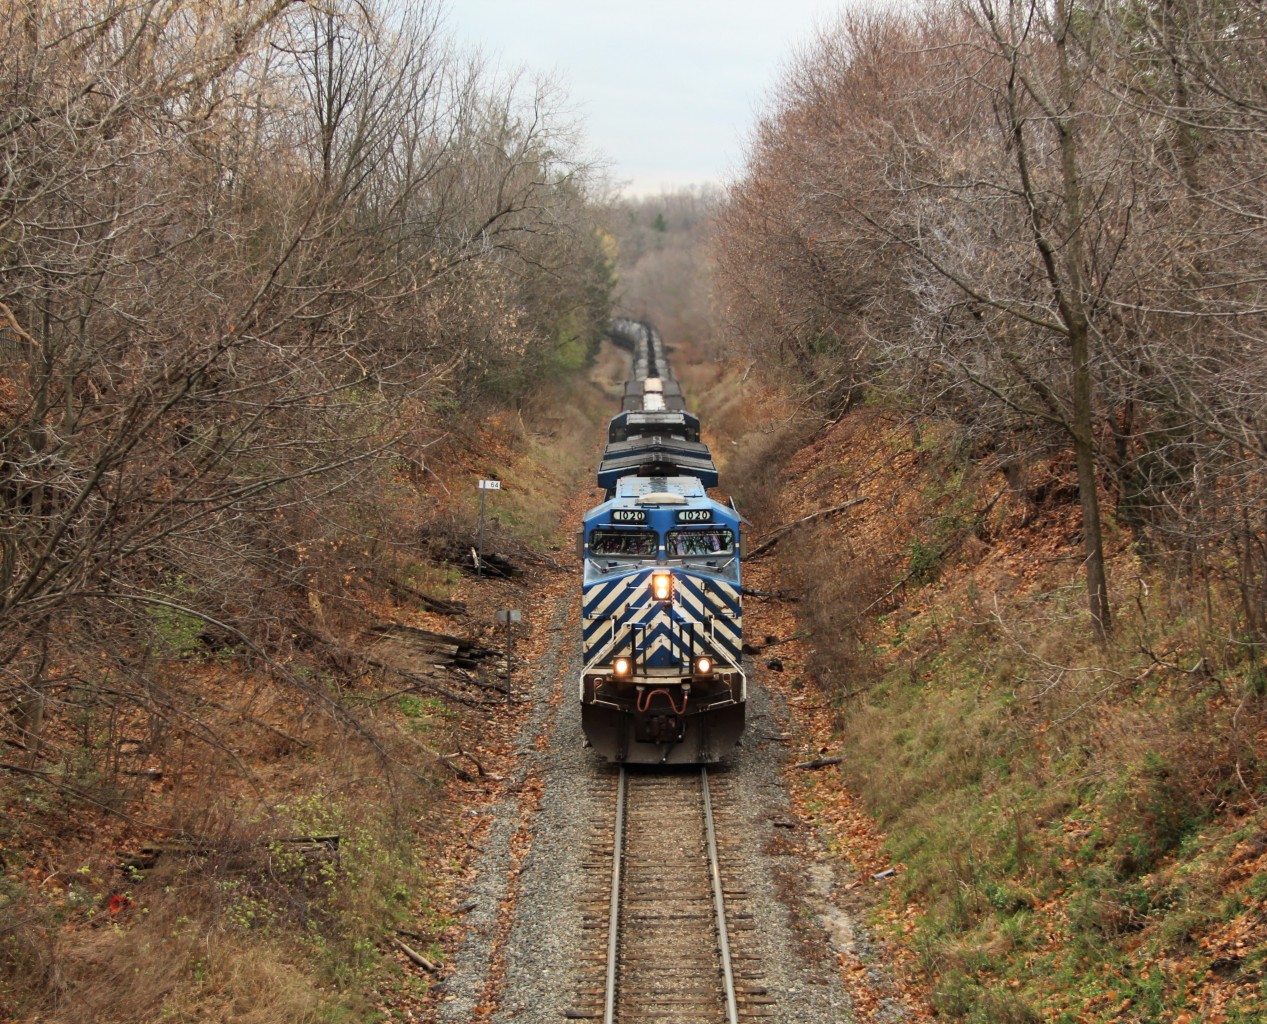 After a lengthy wait for a clearance, CEFX 1020 leads CEFX 1040 up the steep grade past MM 64 and under the Snake road wooden bridge in Waterdown on its way to Guelph Junction.